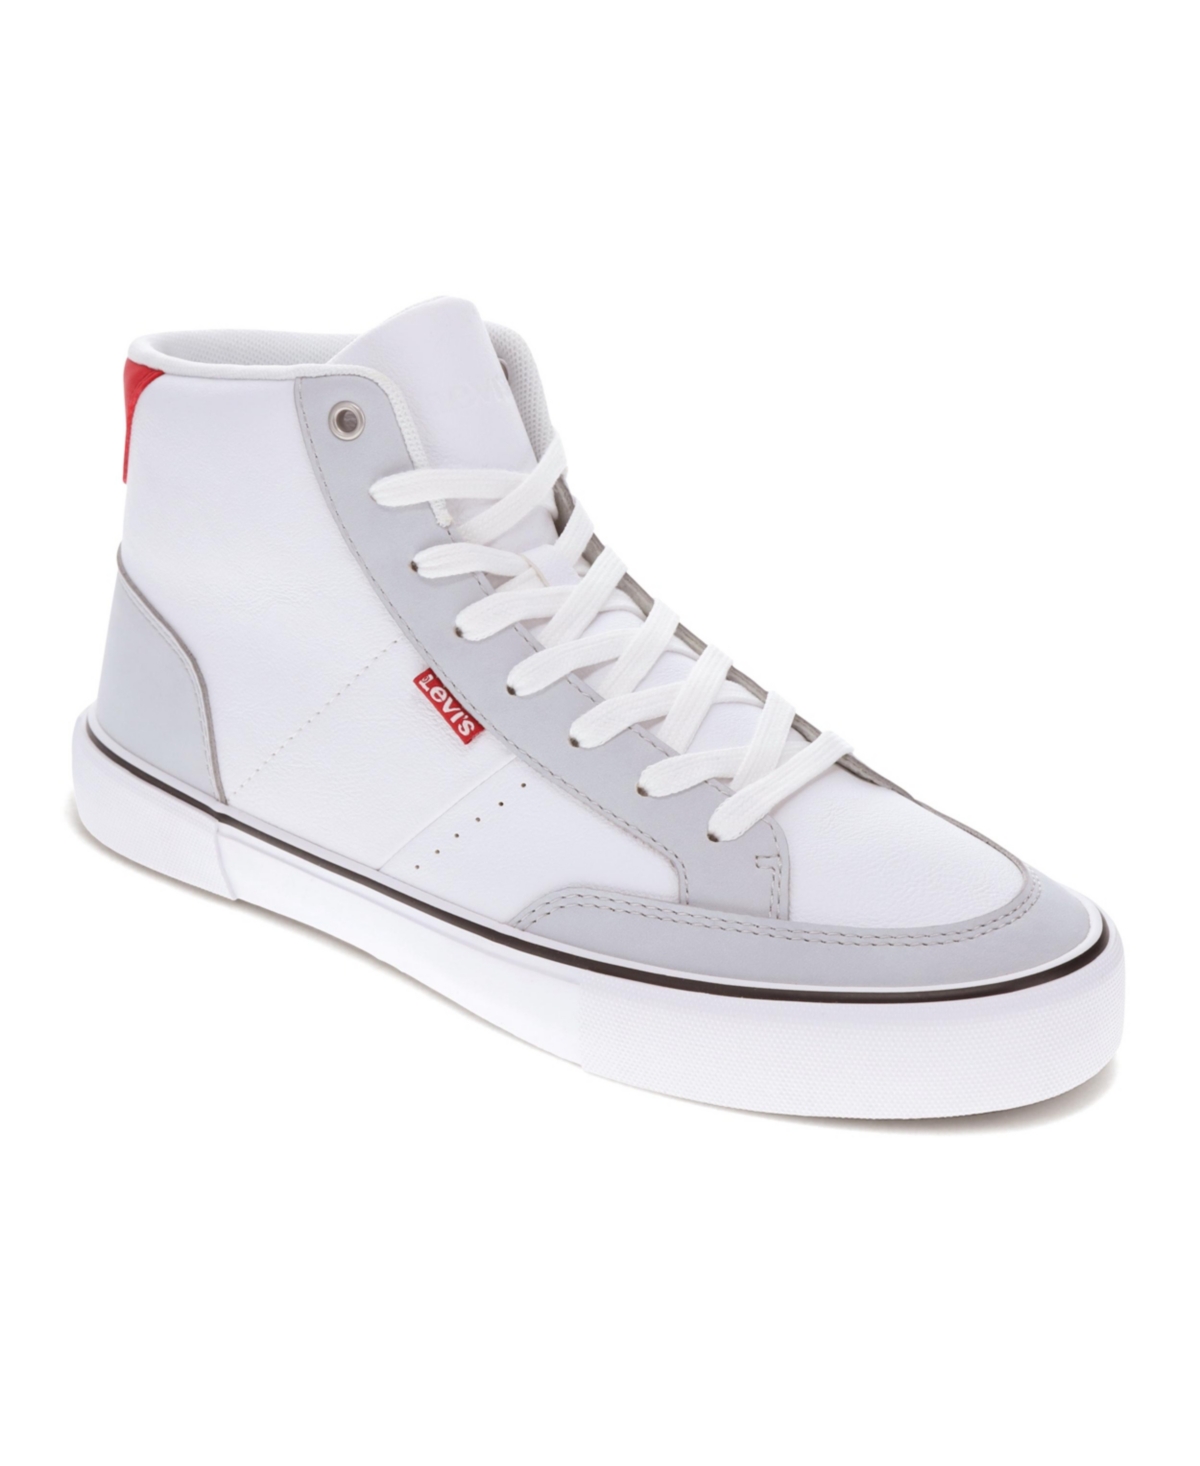 Men's Munro Mid Casual Sneakers - White, Gray, Red